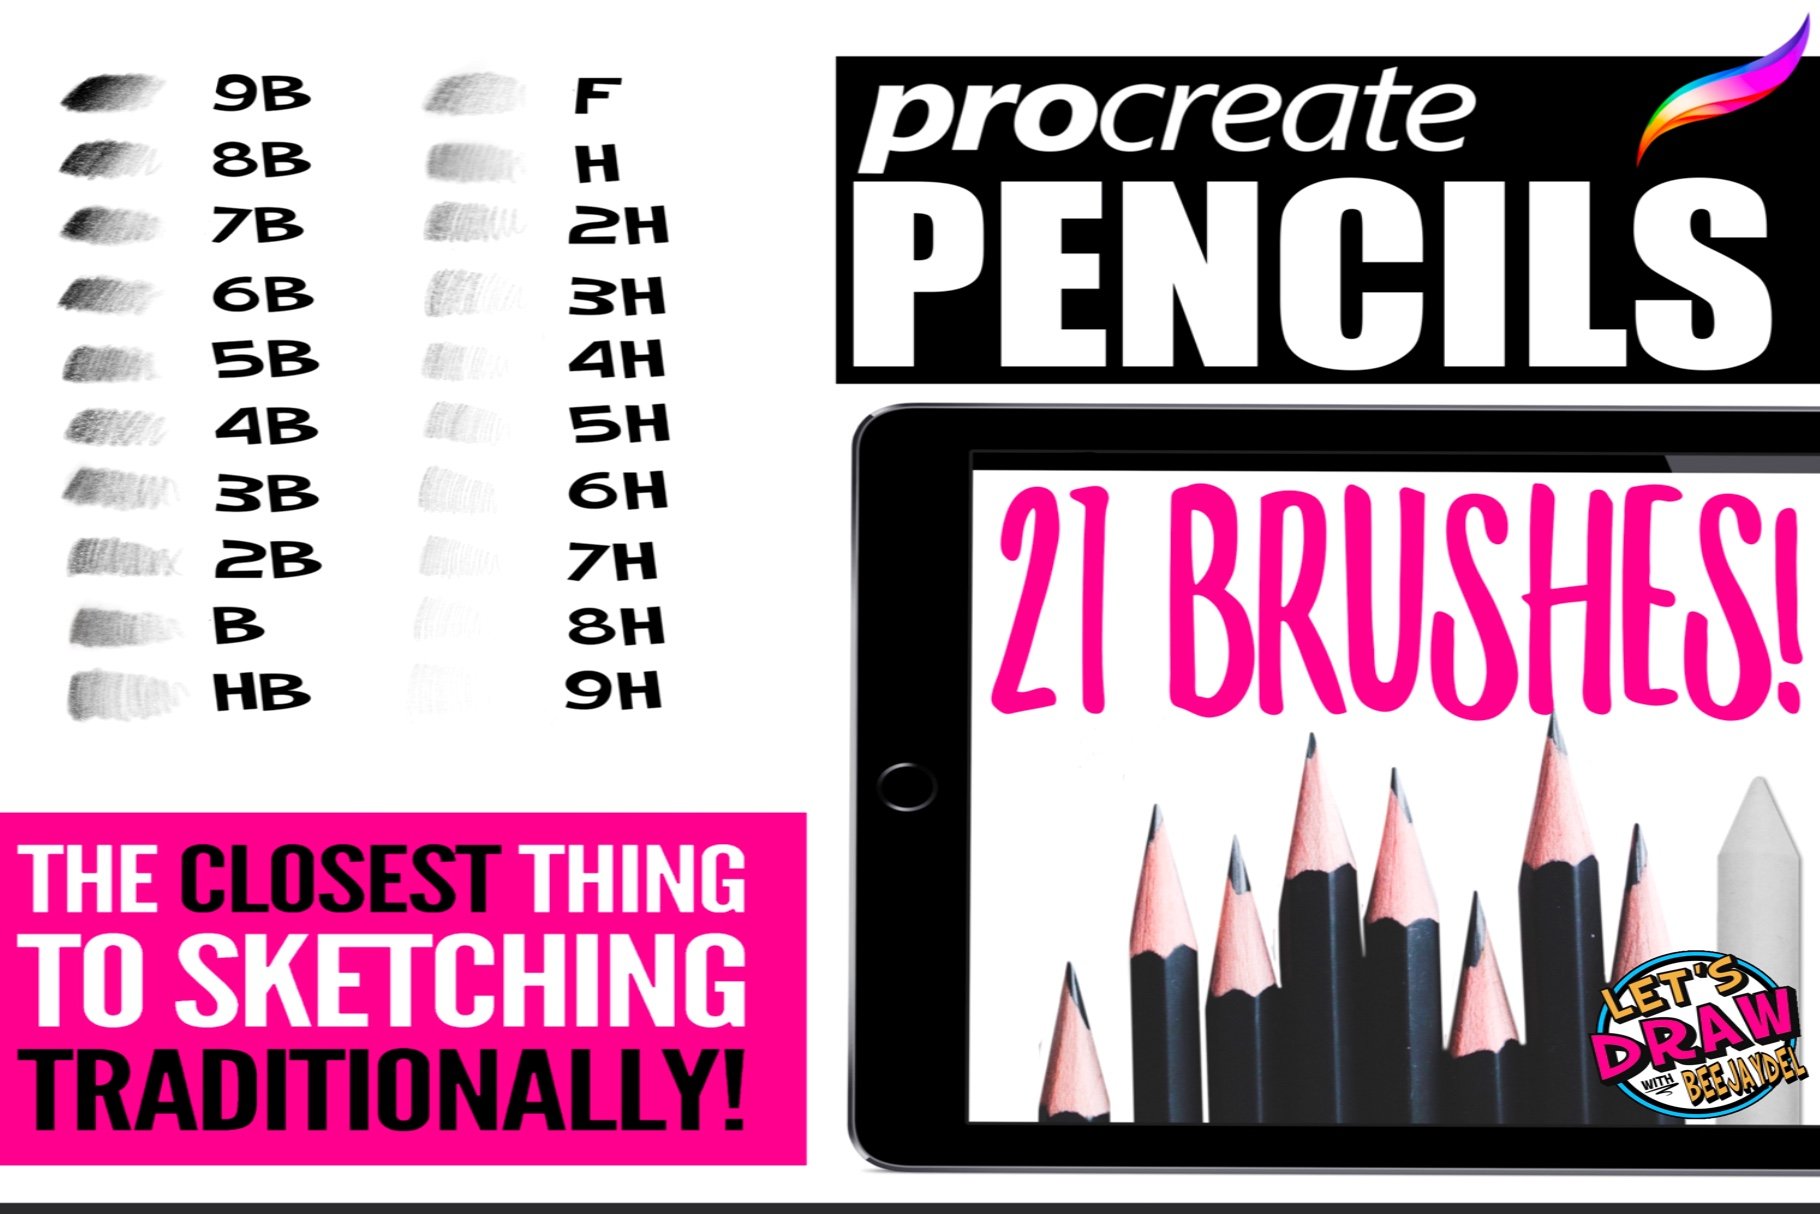 Pencil Brushes for Procreate cover image.